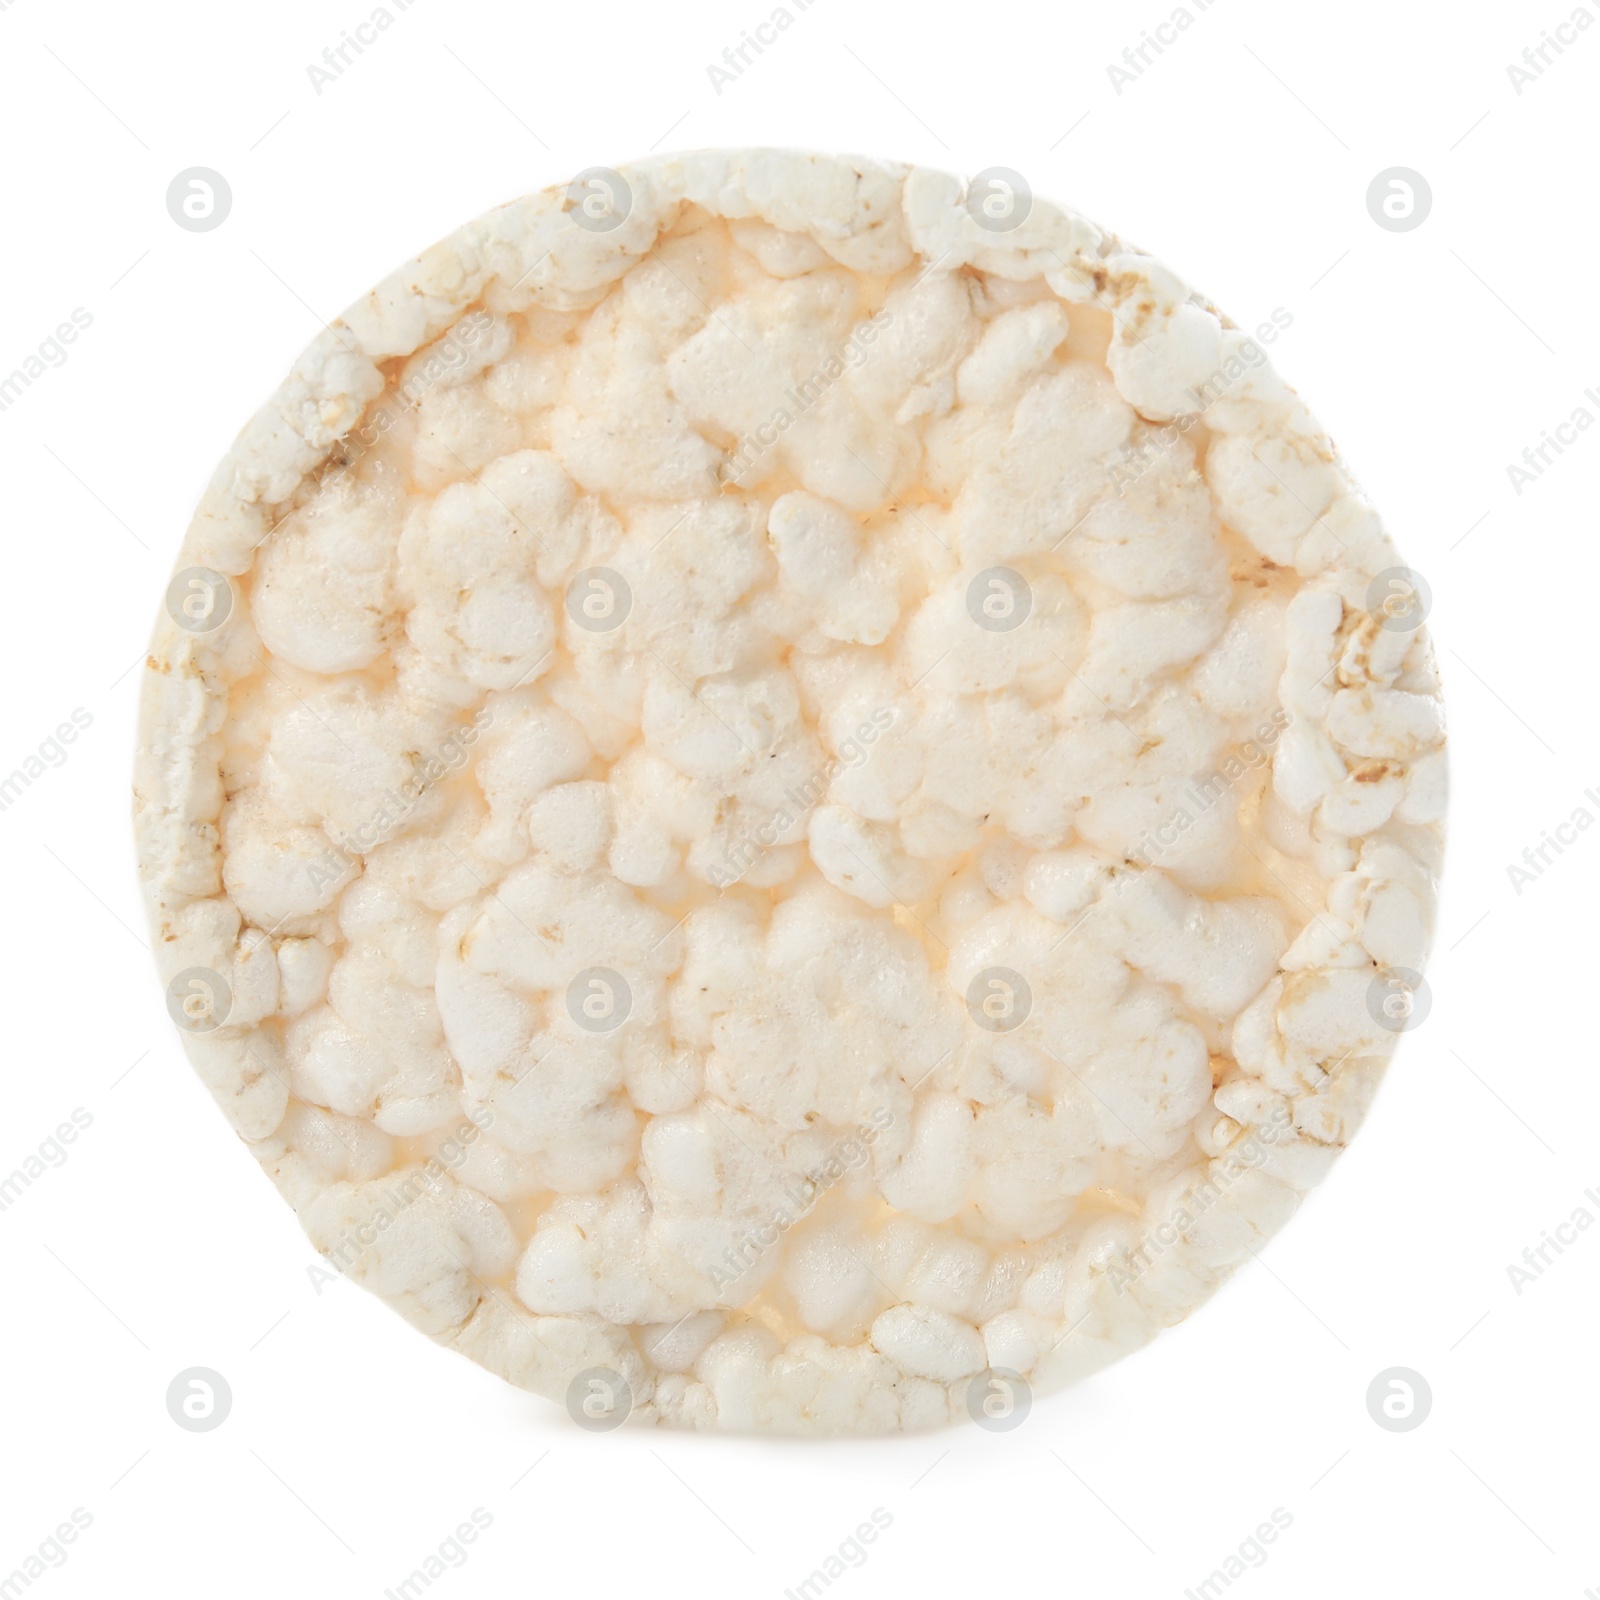 Photo of Puffed rice cake isolated on white. Healthy snack